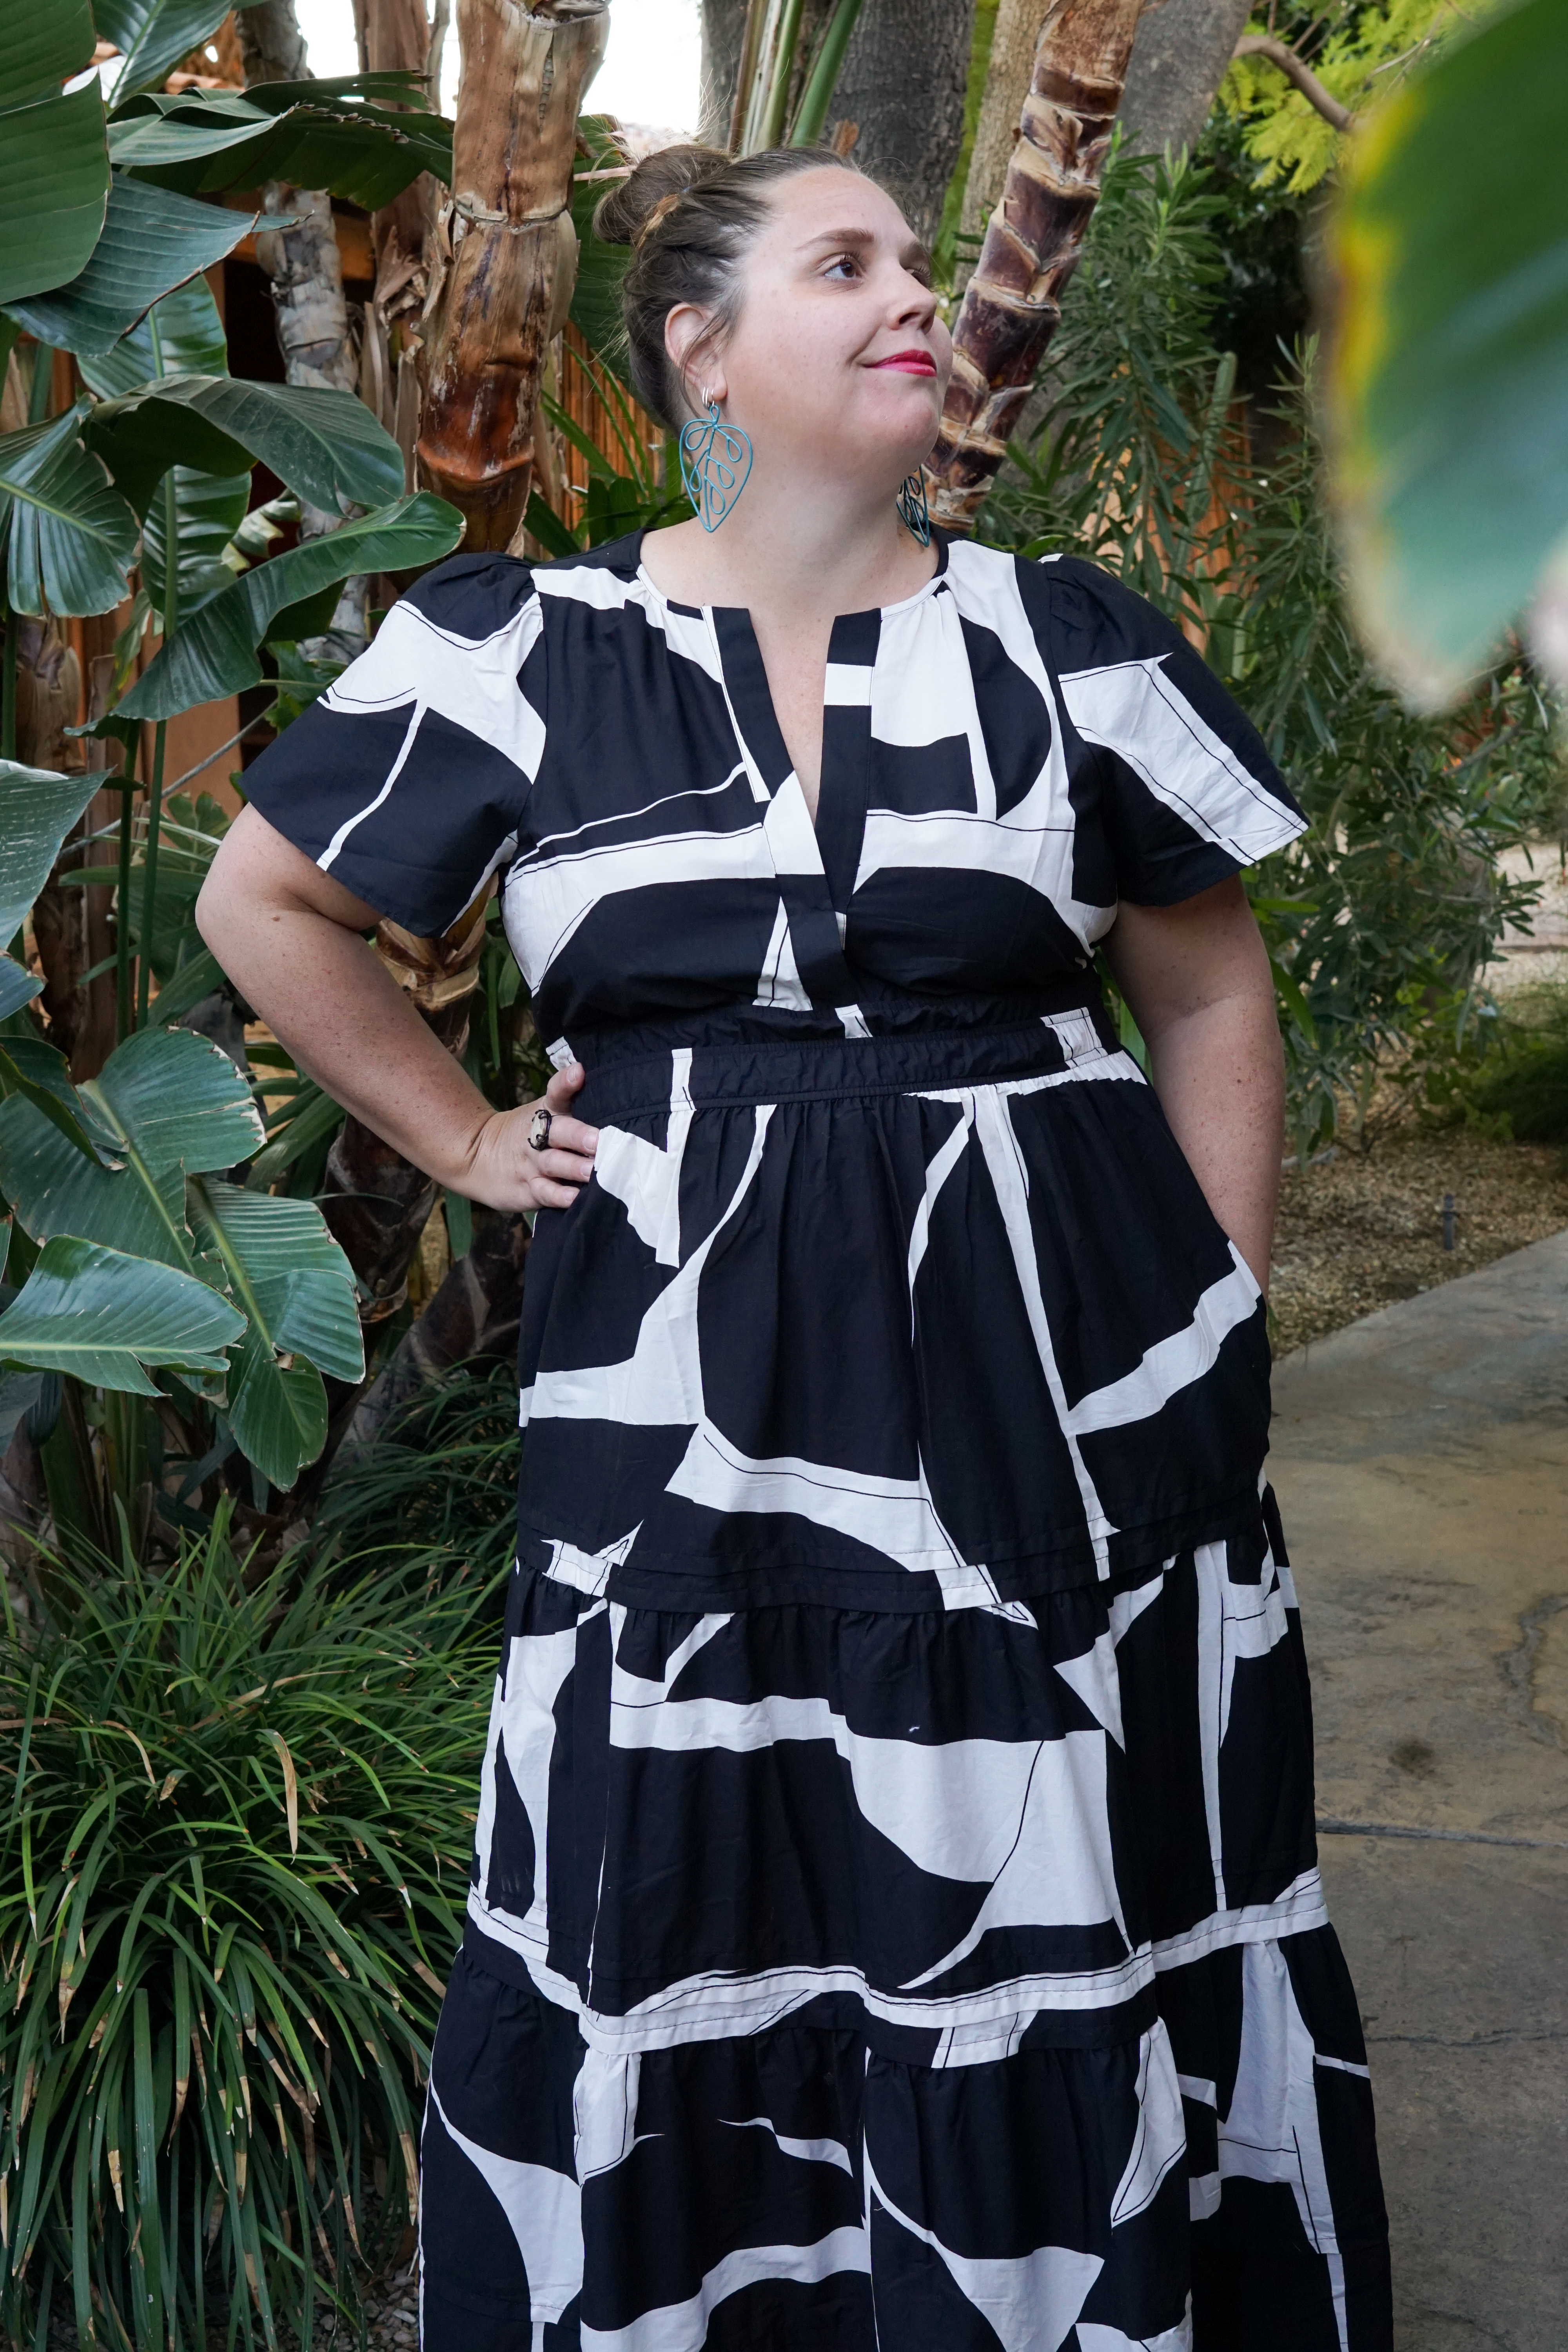 woman wearing black and white dress and statement earrings in a garden in palm springs, california